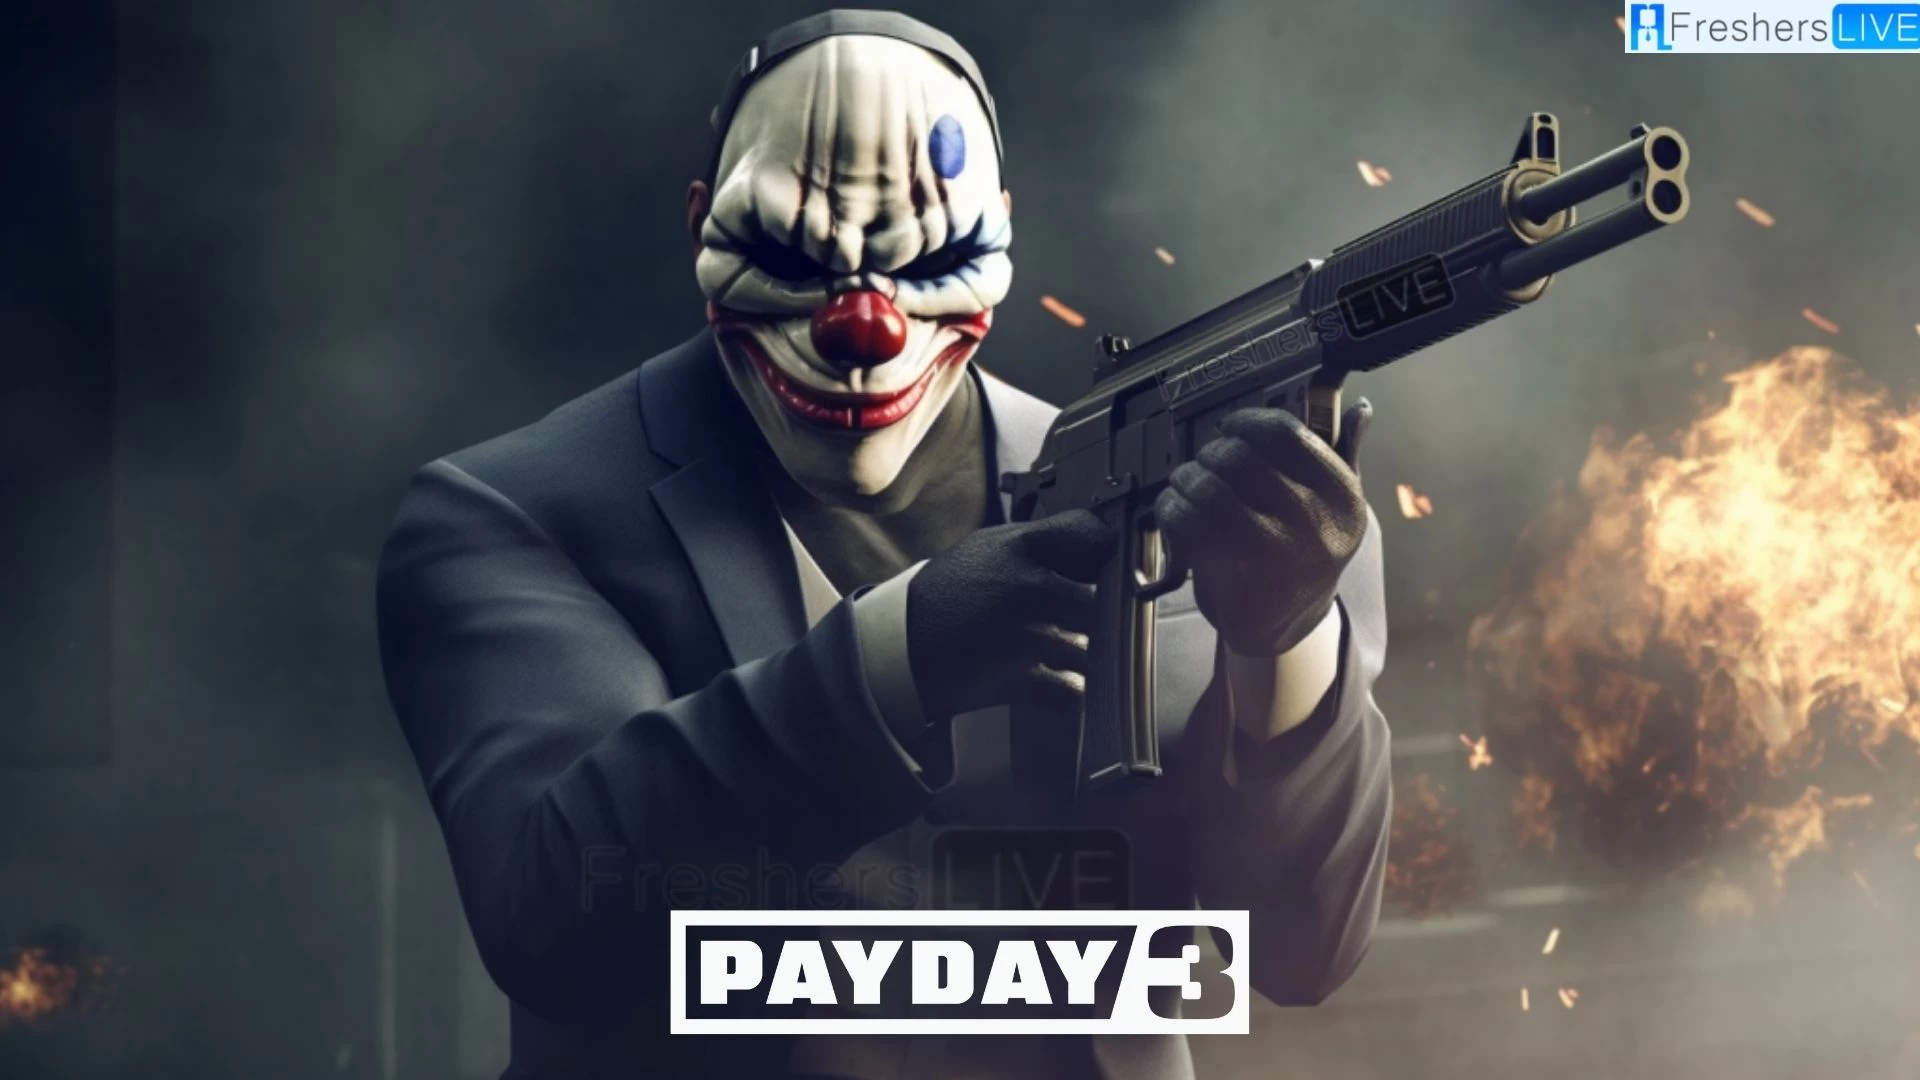 Payday 3 Skill Points, What's the Max Skill Point in Payday 3? How Many Skills Are There?